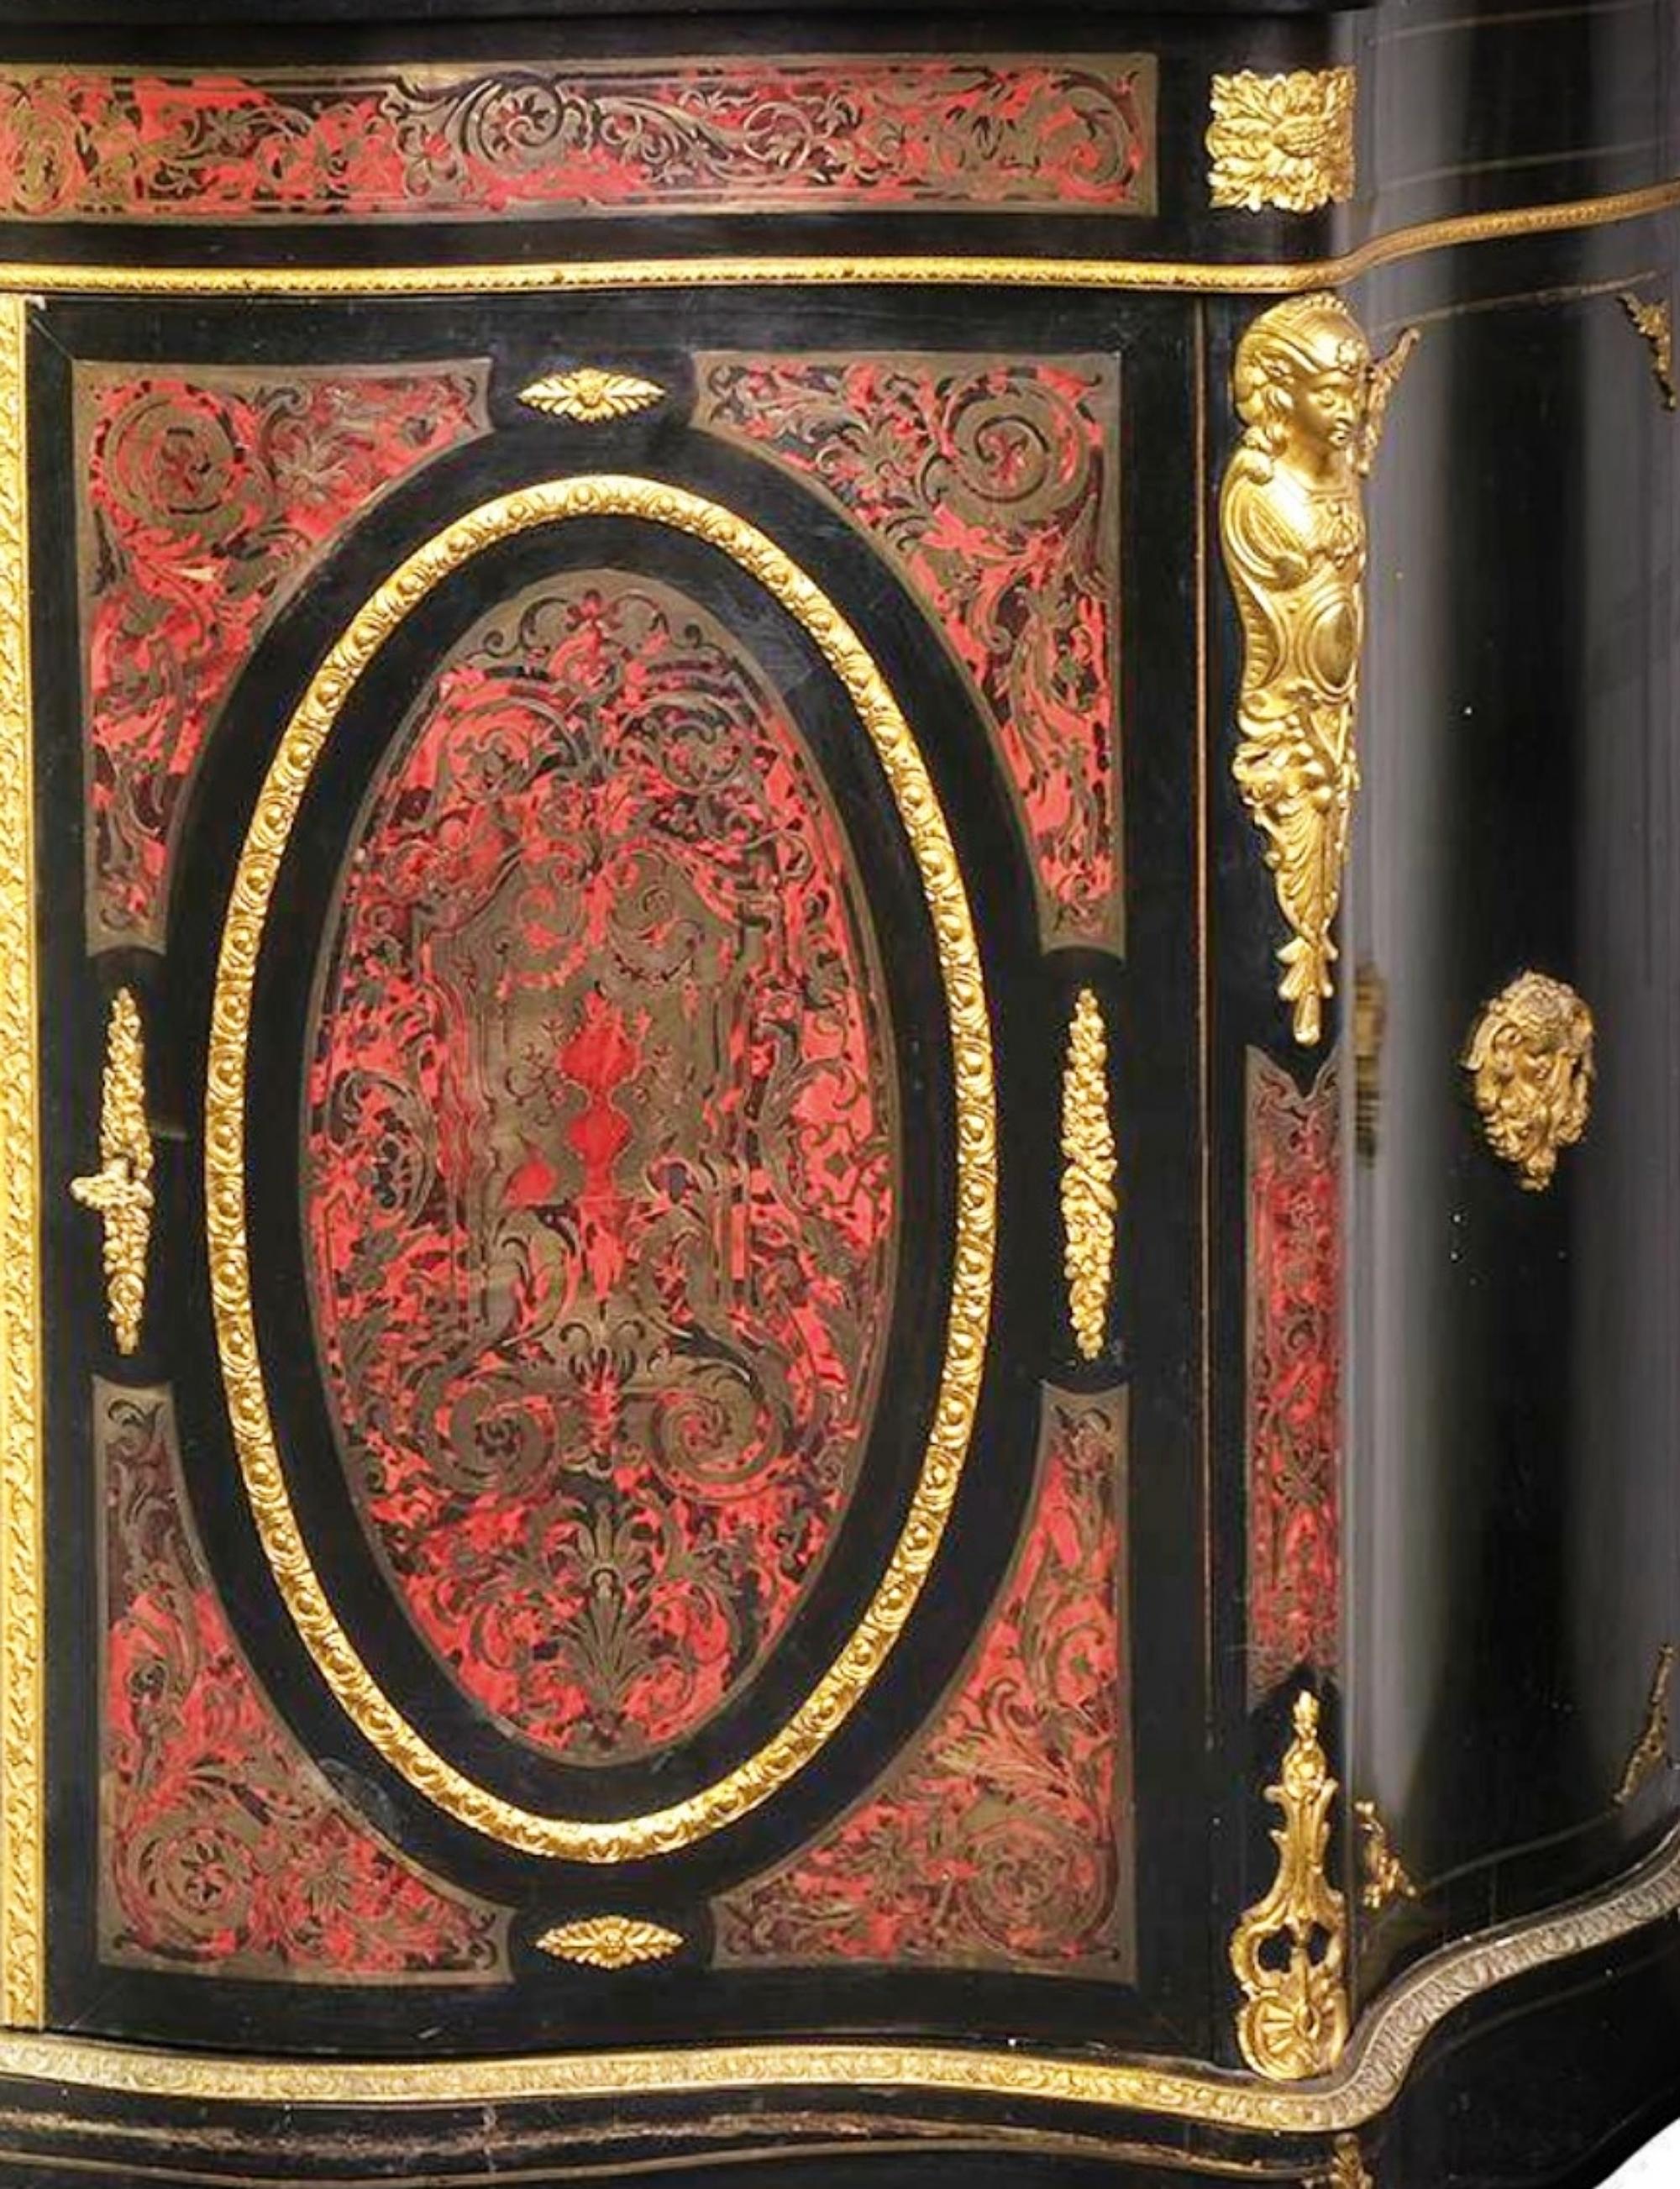 Napoleon III entredos in ebonized wood with Boulle marquetry in brass and tortoiseshell with bronze fittings. France, last third of the 19th century
White marble envelope.
Measurements: 104 x 132 x 50 cm
Good condition.